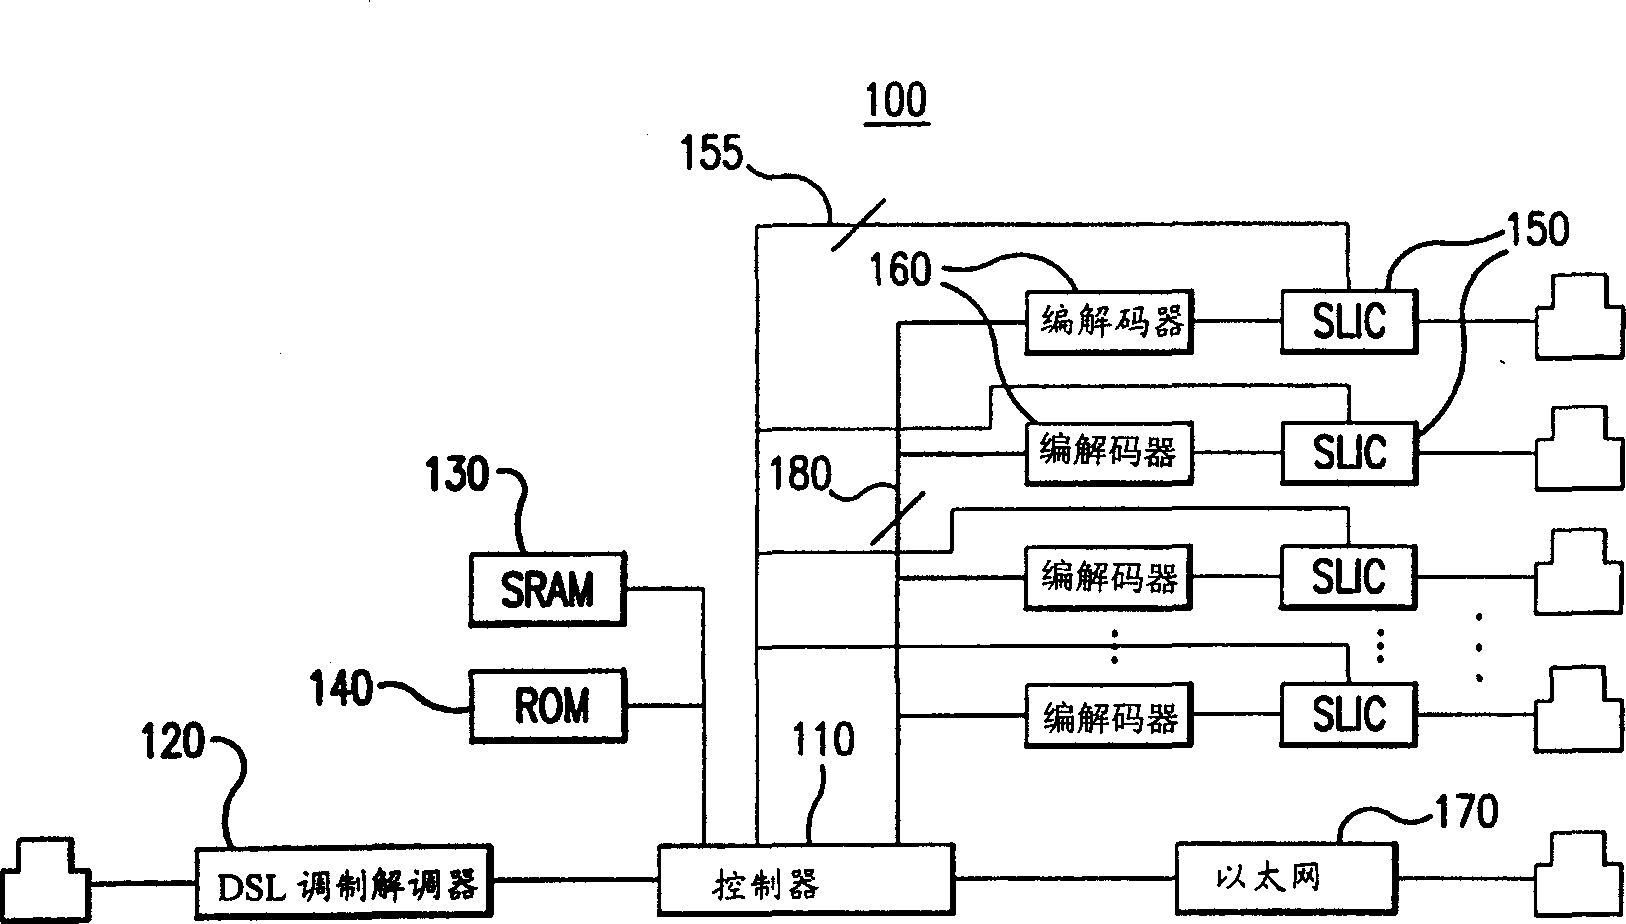 System and method for communicating voice and data cover local packet network